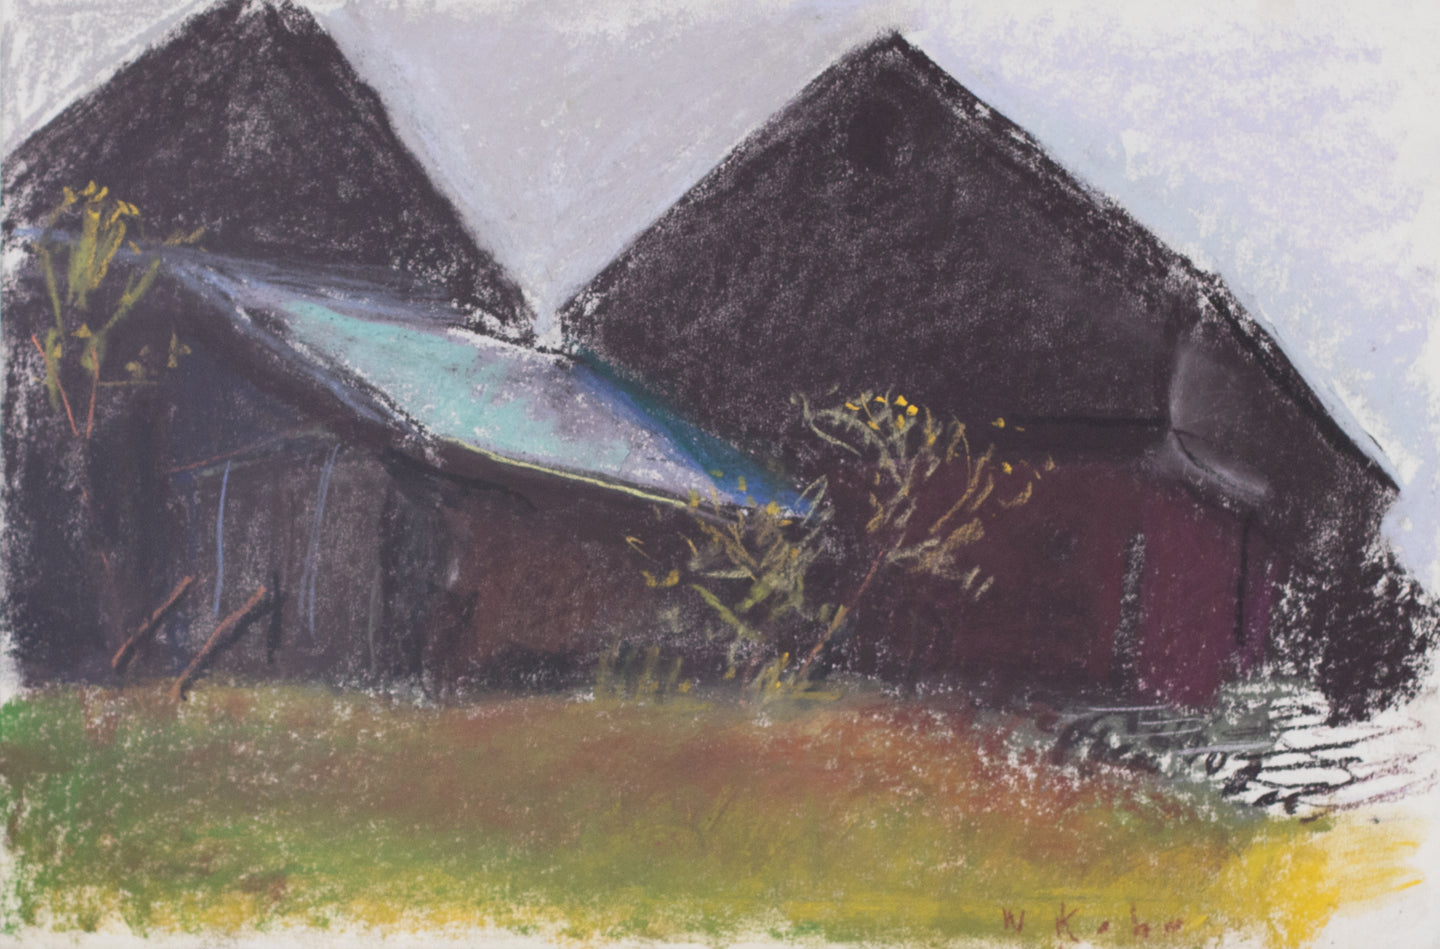 Wolf Kahn (1927-2020)  Million Dollar Barn, 2007  Pastel on paper  12 x 18 inches, unframed  This barn is called the Million Dollar Barn because Kahn painted it so many times that he was sure that he had earned at least a million dollars from the sale of those paintings. This is a historically significant painting. The colors are rich burgundy, lilacs, greens, and blues. Available at Manolis Projects Gallery.